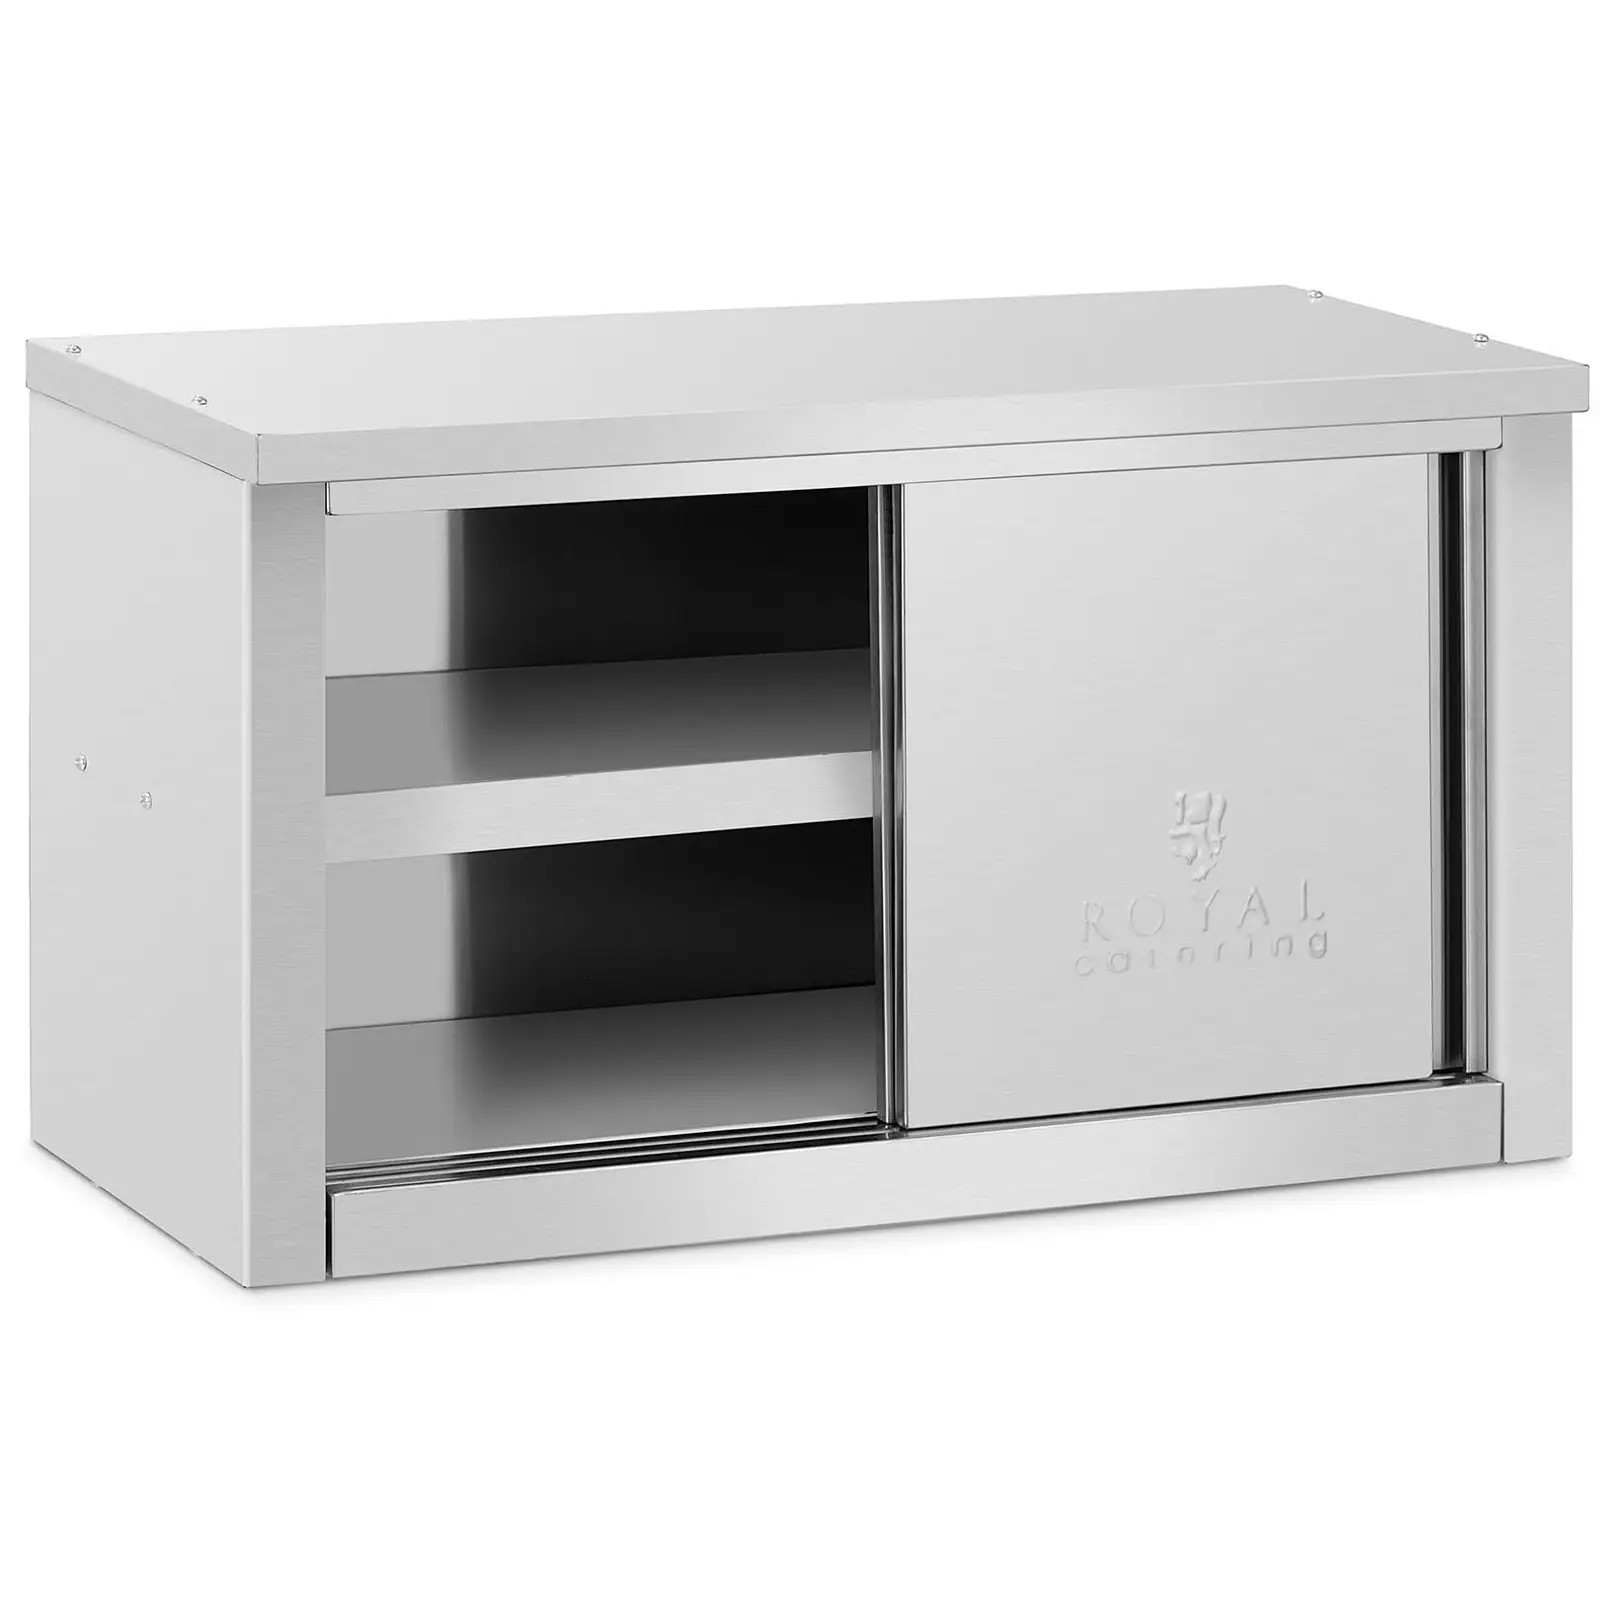 Hanging Cabinet - 900 x 400 x 500 mm - 60 kg load capacity per compartment - Royal Catering